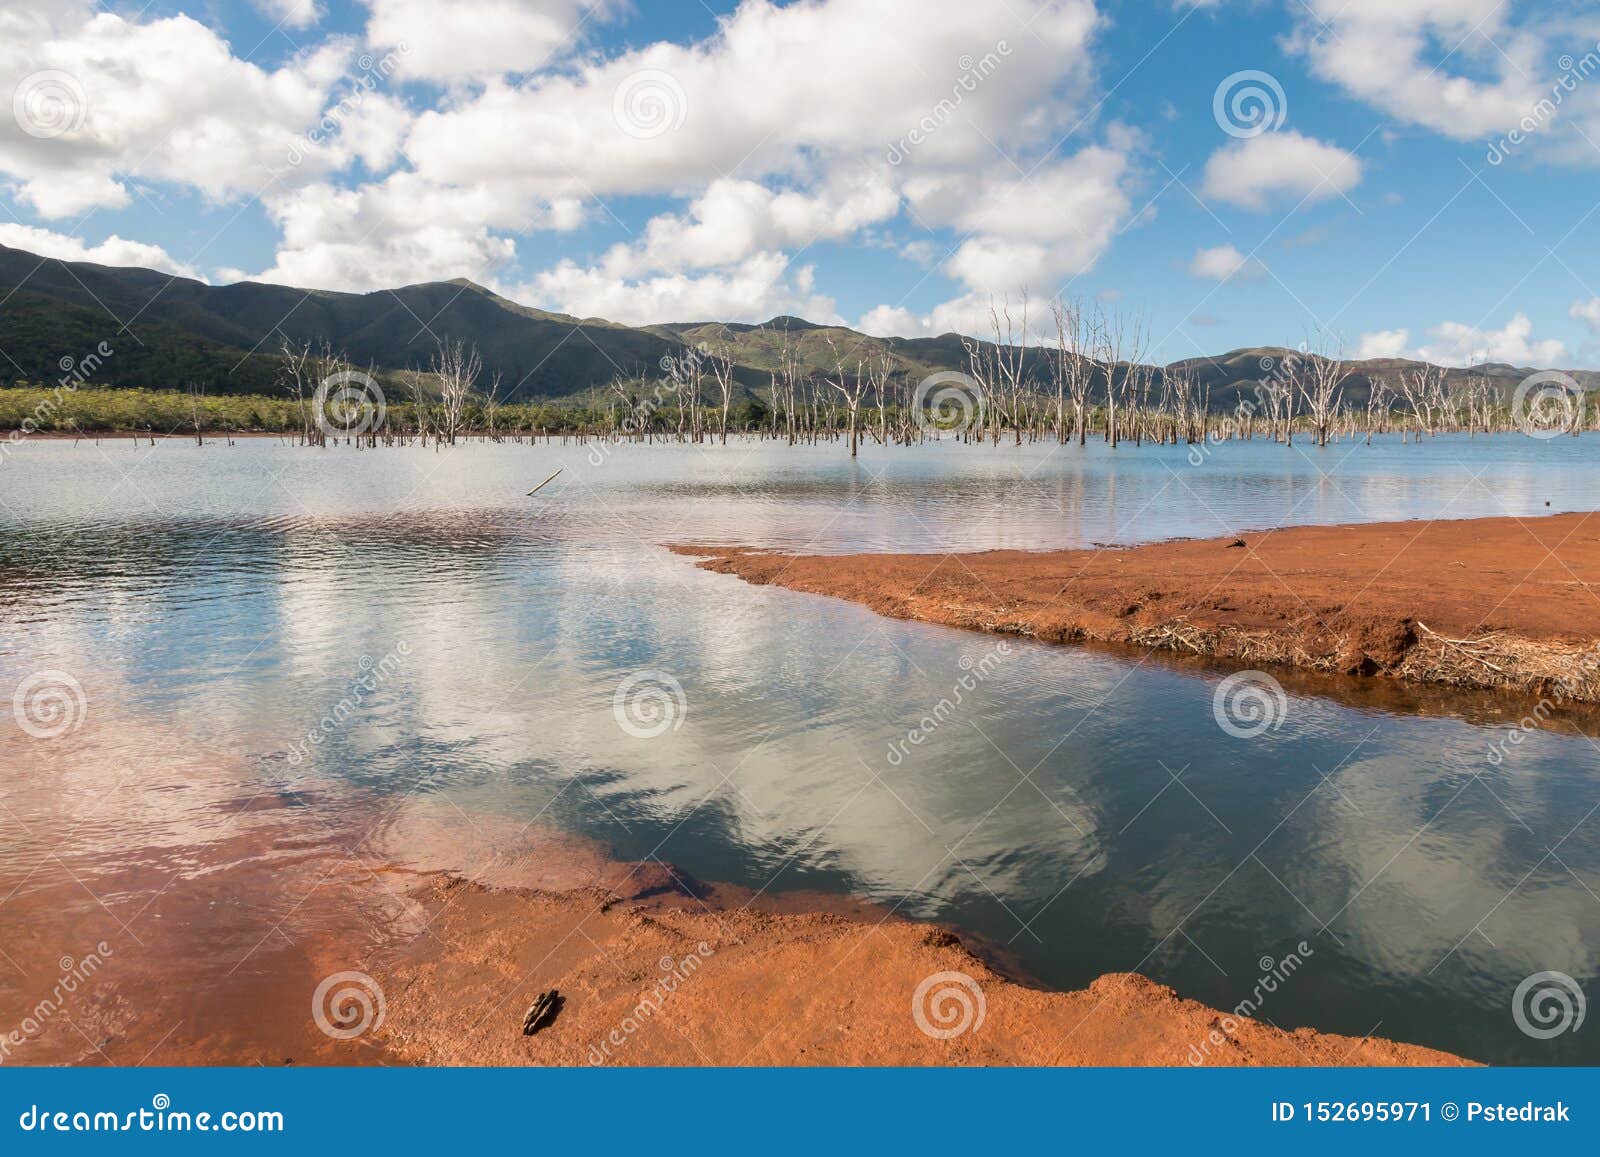 yate lake with drowned forest in blue river national park in new caledonia